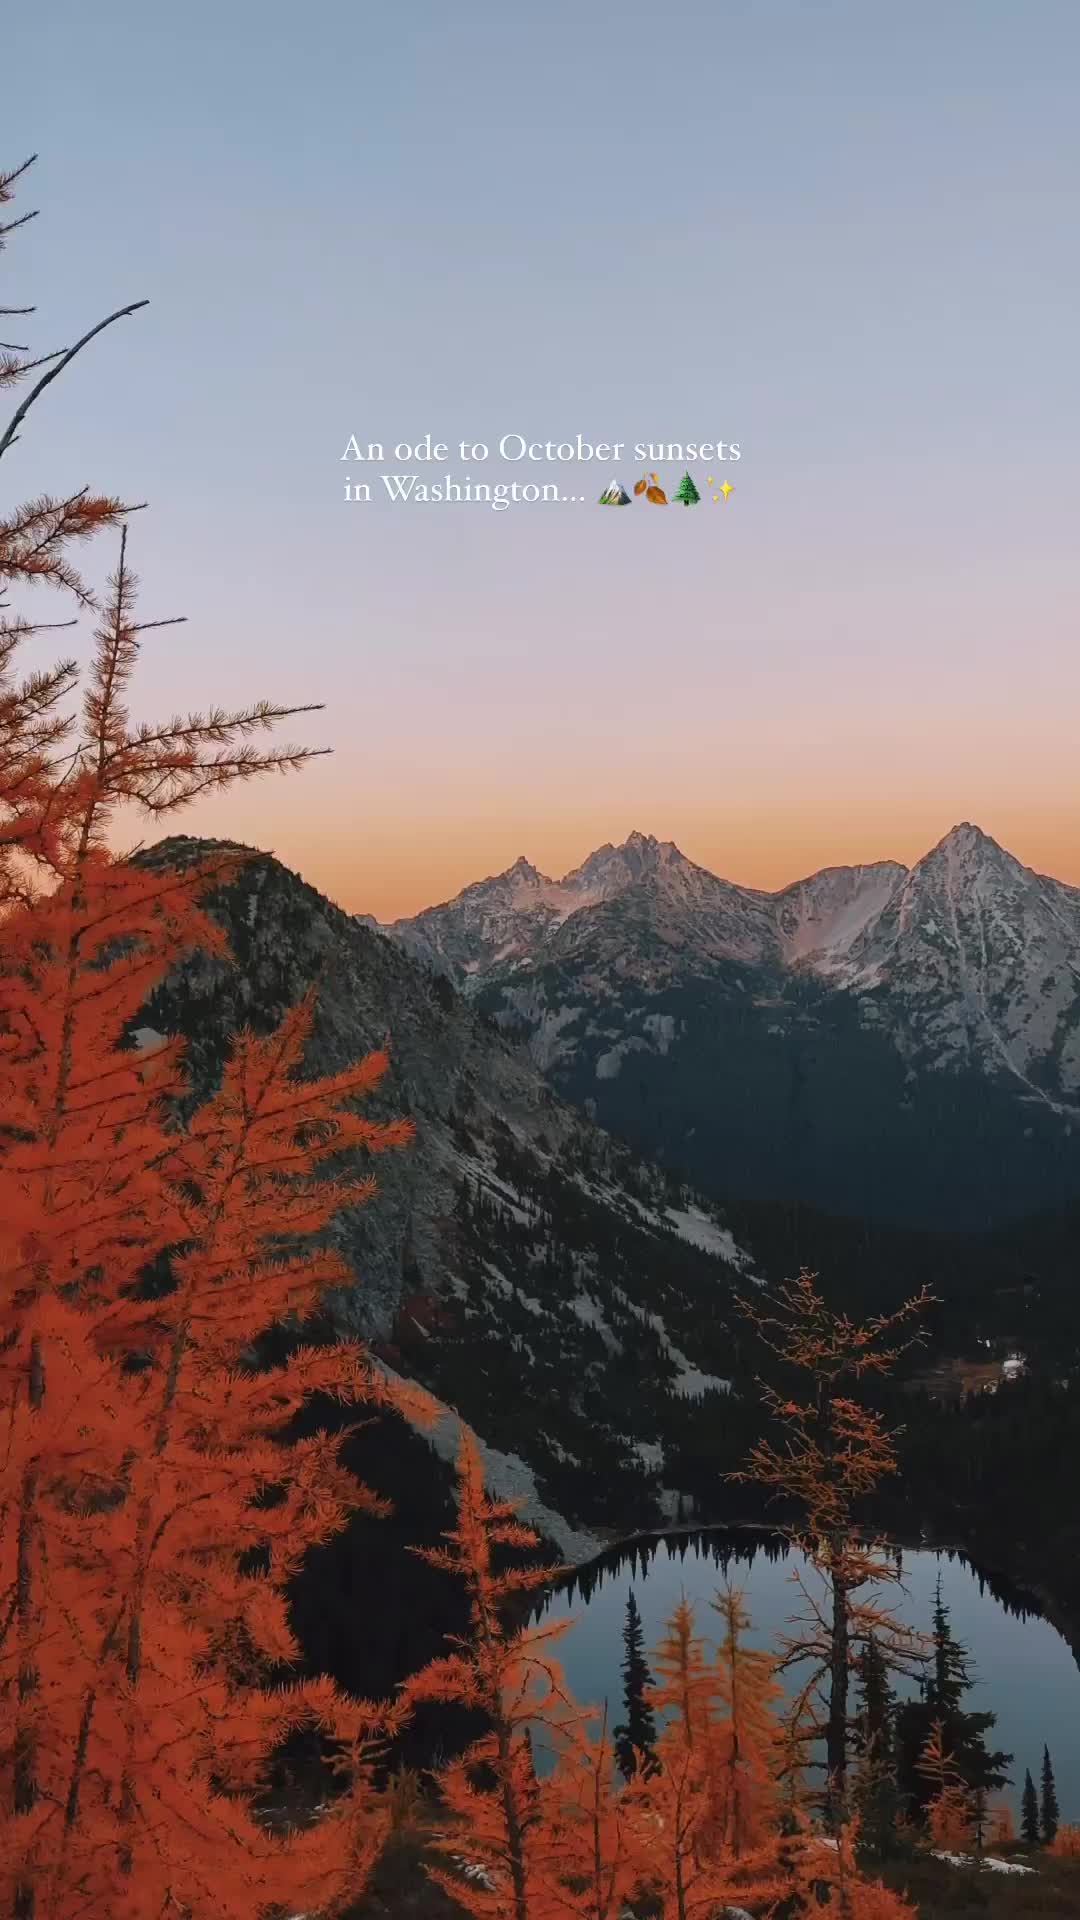 I think it’s safe to say I will always plan a trip to the North Cascades during the first two weeks of October 🍂✨

It was my first time seeing larches and I couldn’t believe my eyes. The larch tree is a deciduous conifer— like an evergreen but loses its needles. In the cooler months, the larches turn golden before losing their needles. And in this part of Washington it’s quite the phenomenon. People from all over flock to these mountains to witness it 🥹 The trees almost don’t look real.

You’ll find larches in parts of Central Europe, the boreal forests further north on the continent, British Columbia and even in parts of New Hampshire and Ohio 💛

Have you seen larches before?

#explorewashington #explorewashstate #pnw #larches #okanogancountry